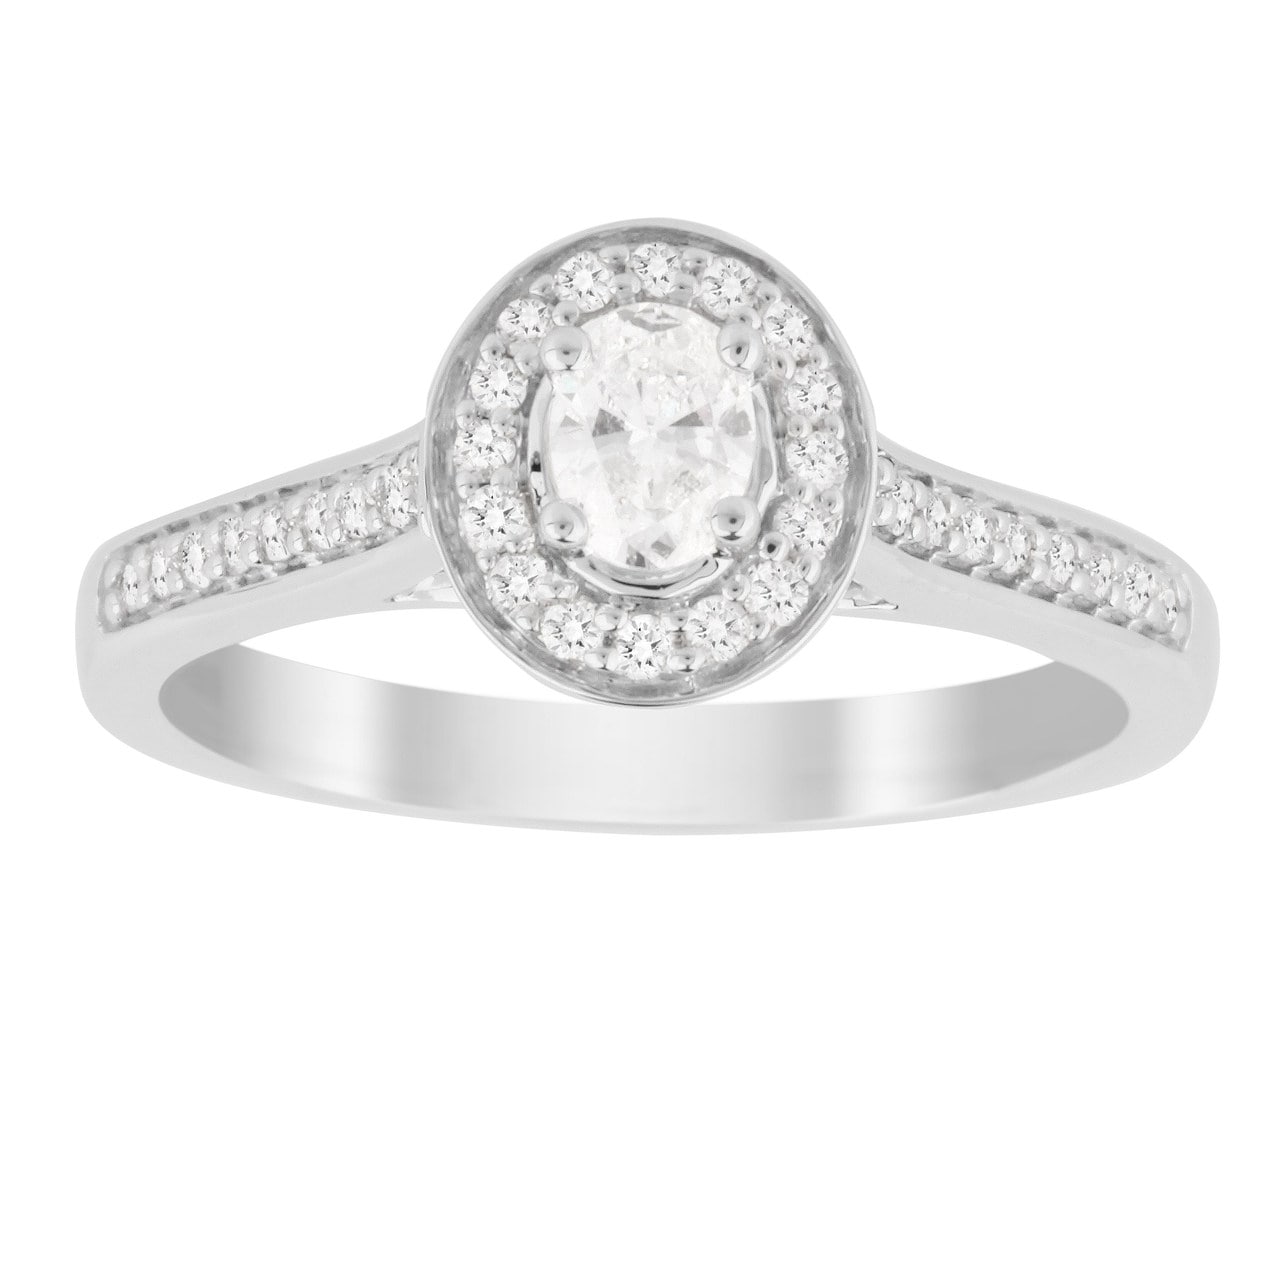 Oval Cut 0.35 Carat Total Weight Halo Diamond Ring In 18 Carat White Gold - Ring Size L